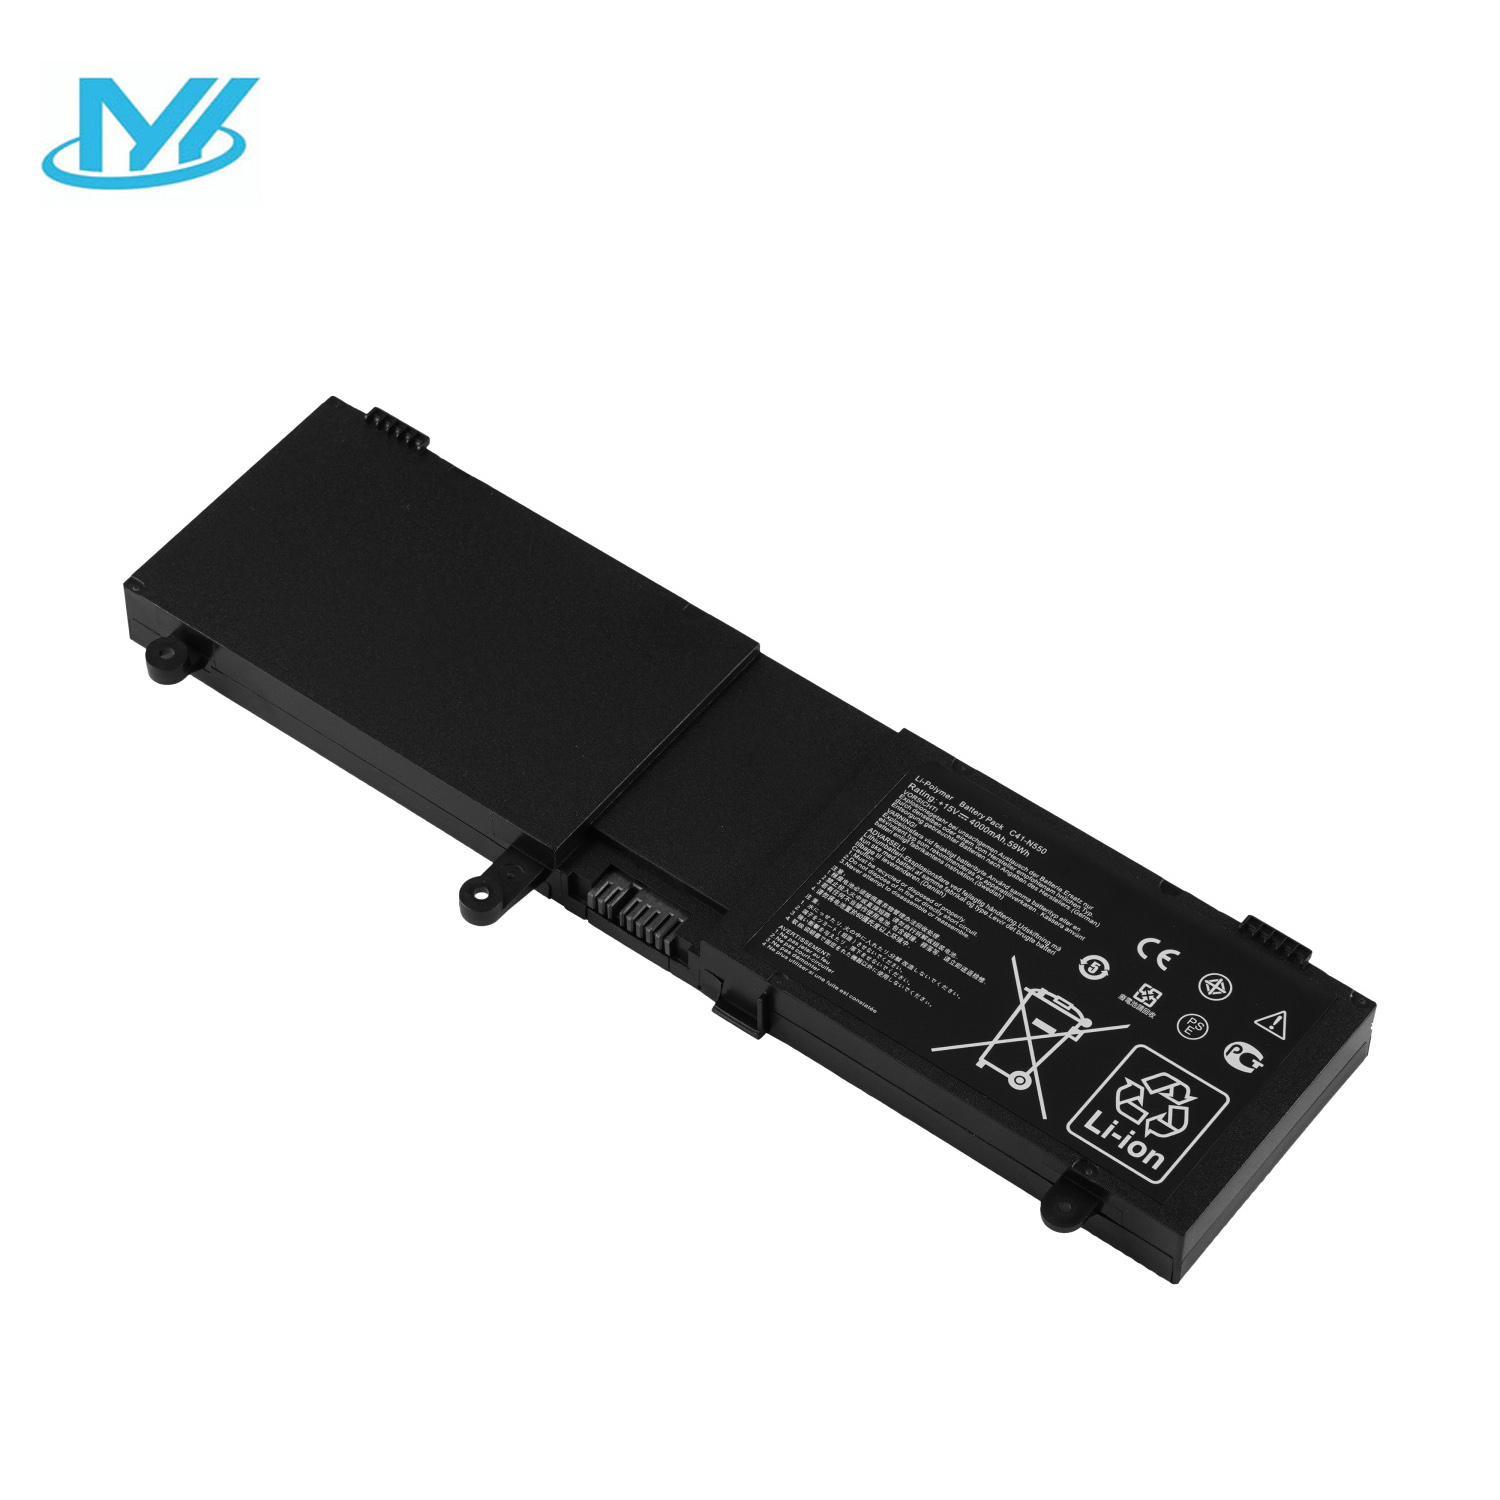 C41-N550 battery for laptop Replacement for ASUS N550JA N550JV N550J N550X47JV N550X47JV-SL N550JK Q550L Q550LF G550 G550JK